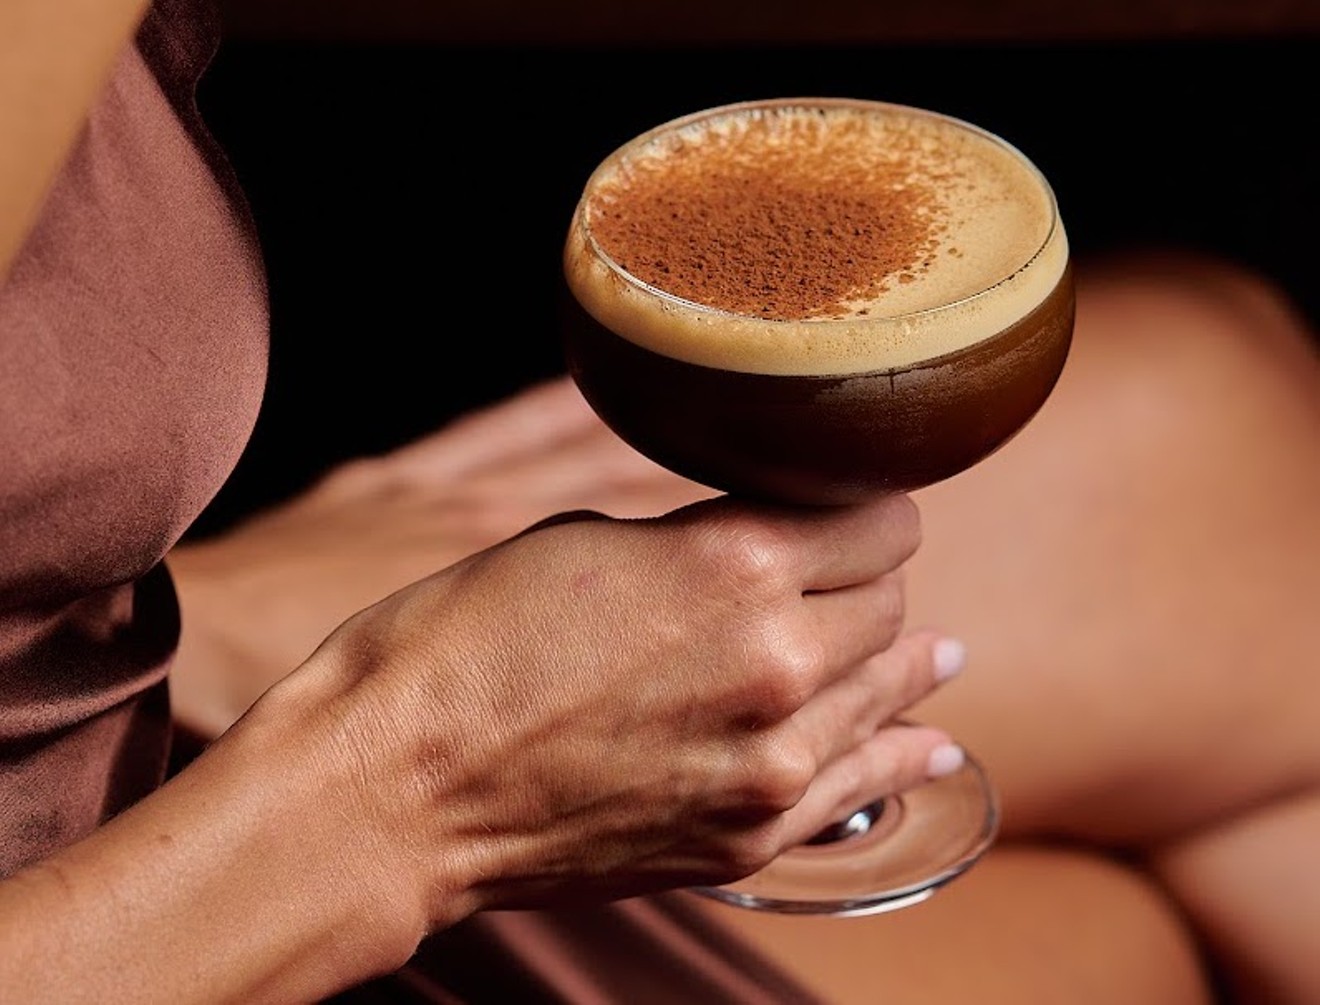 The espresso martini at Michael's Genuine Food & Drink is an elevated take on the classic.